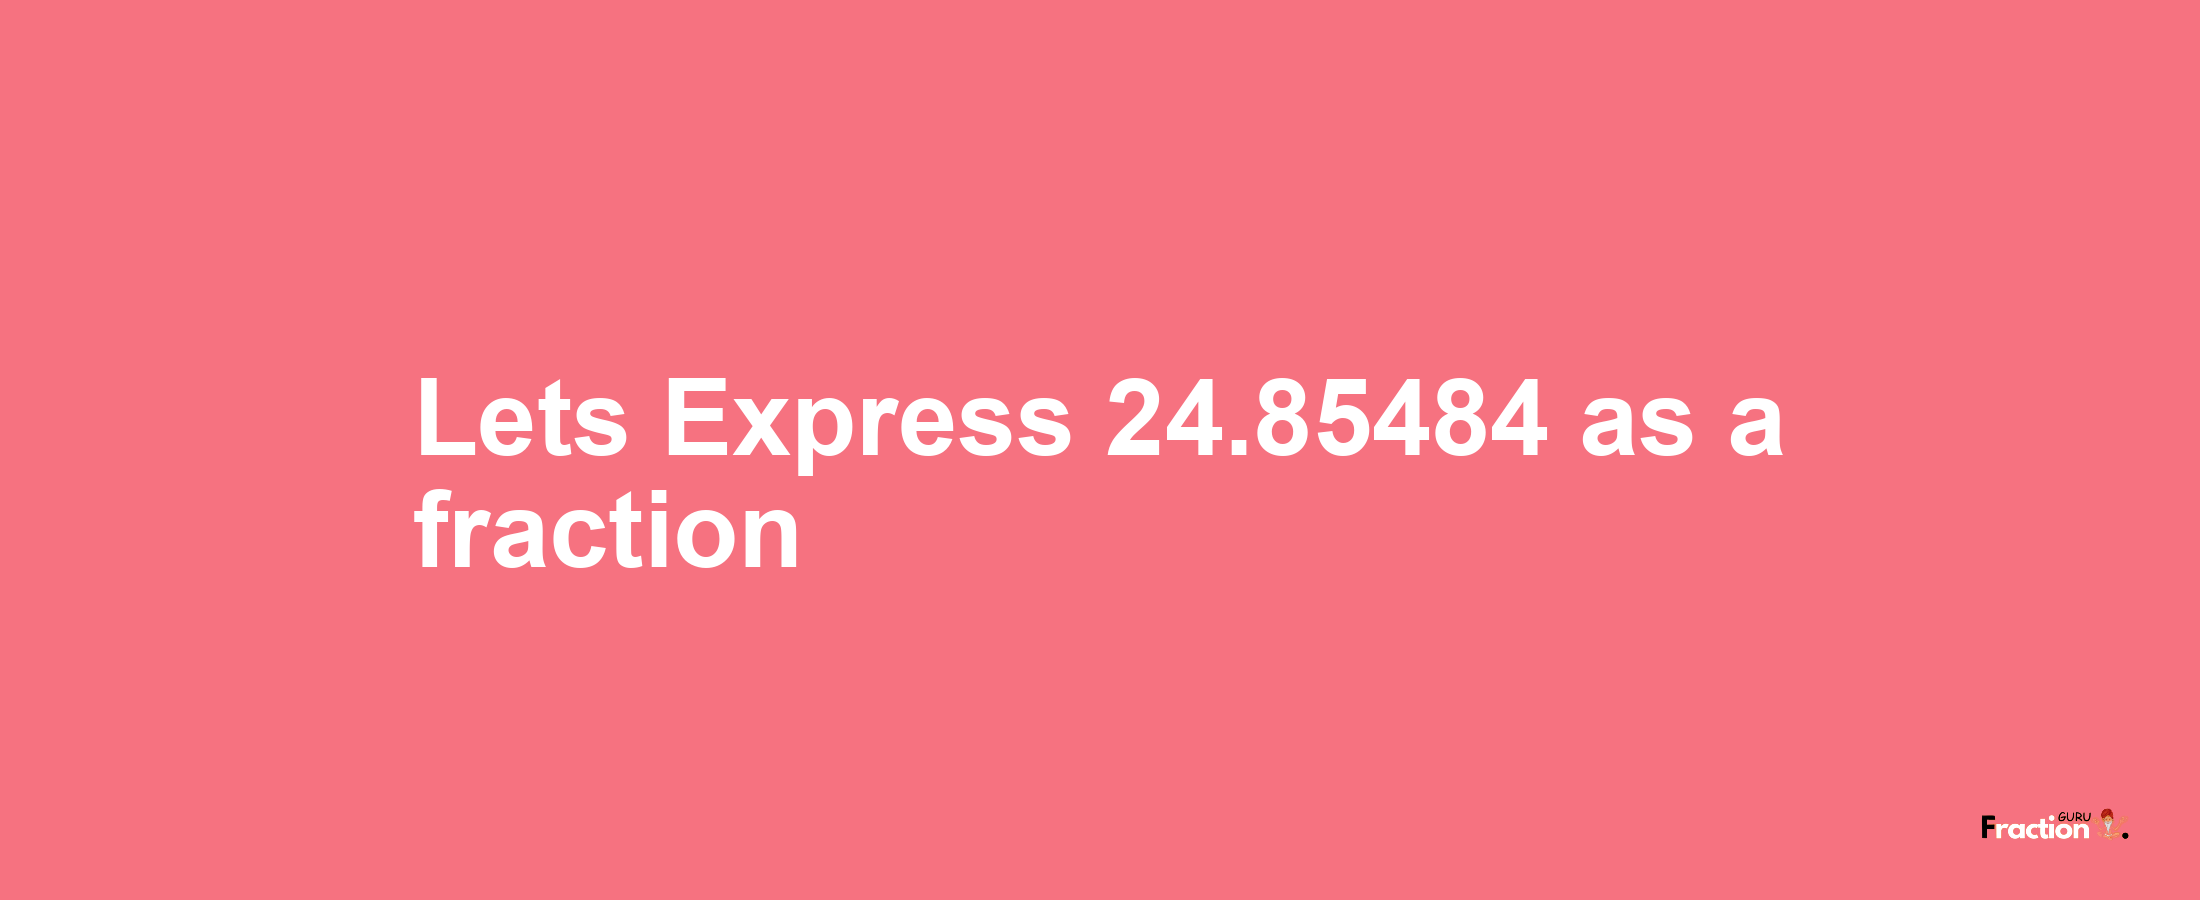 Lets Express 24.85484 as afraction